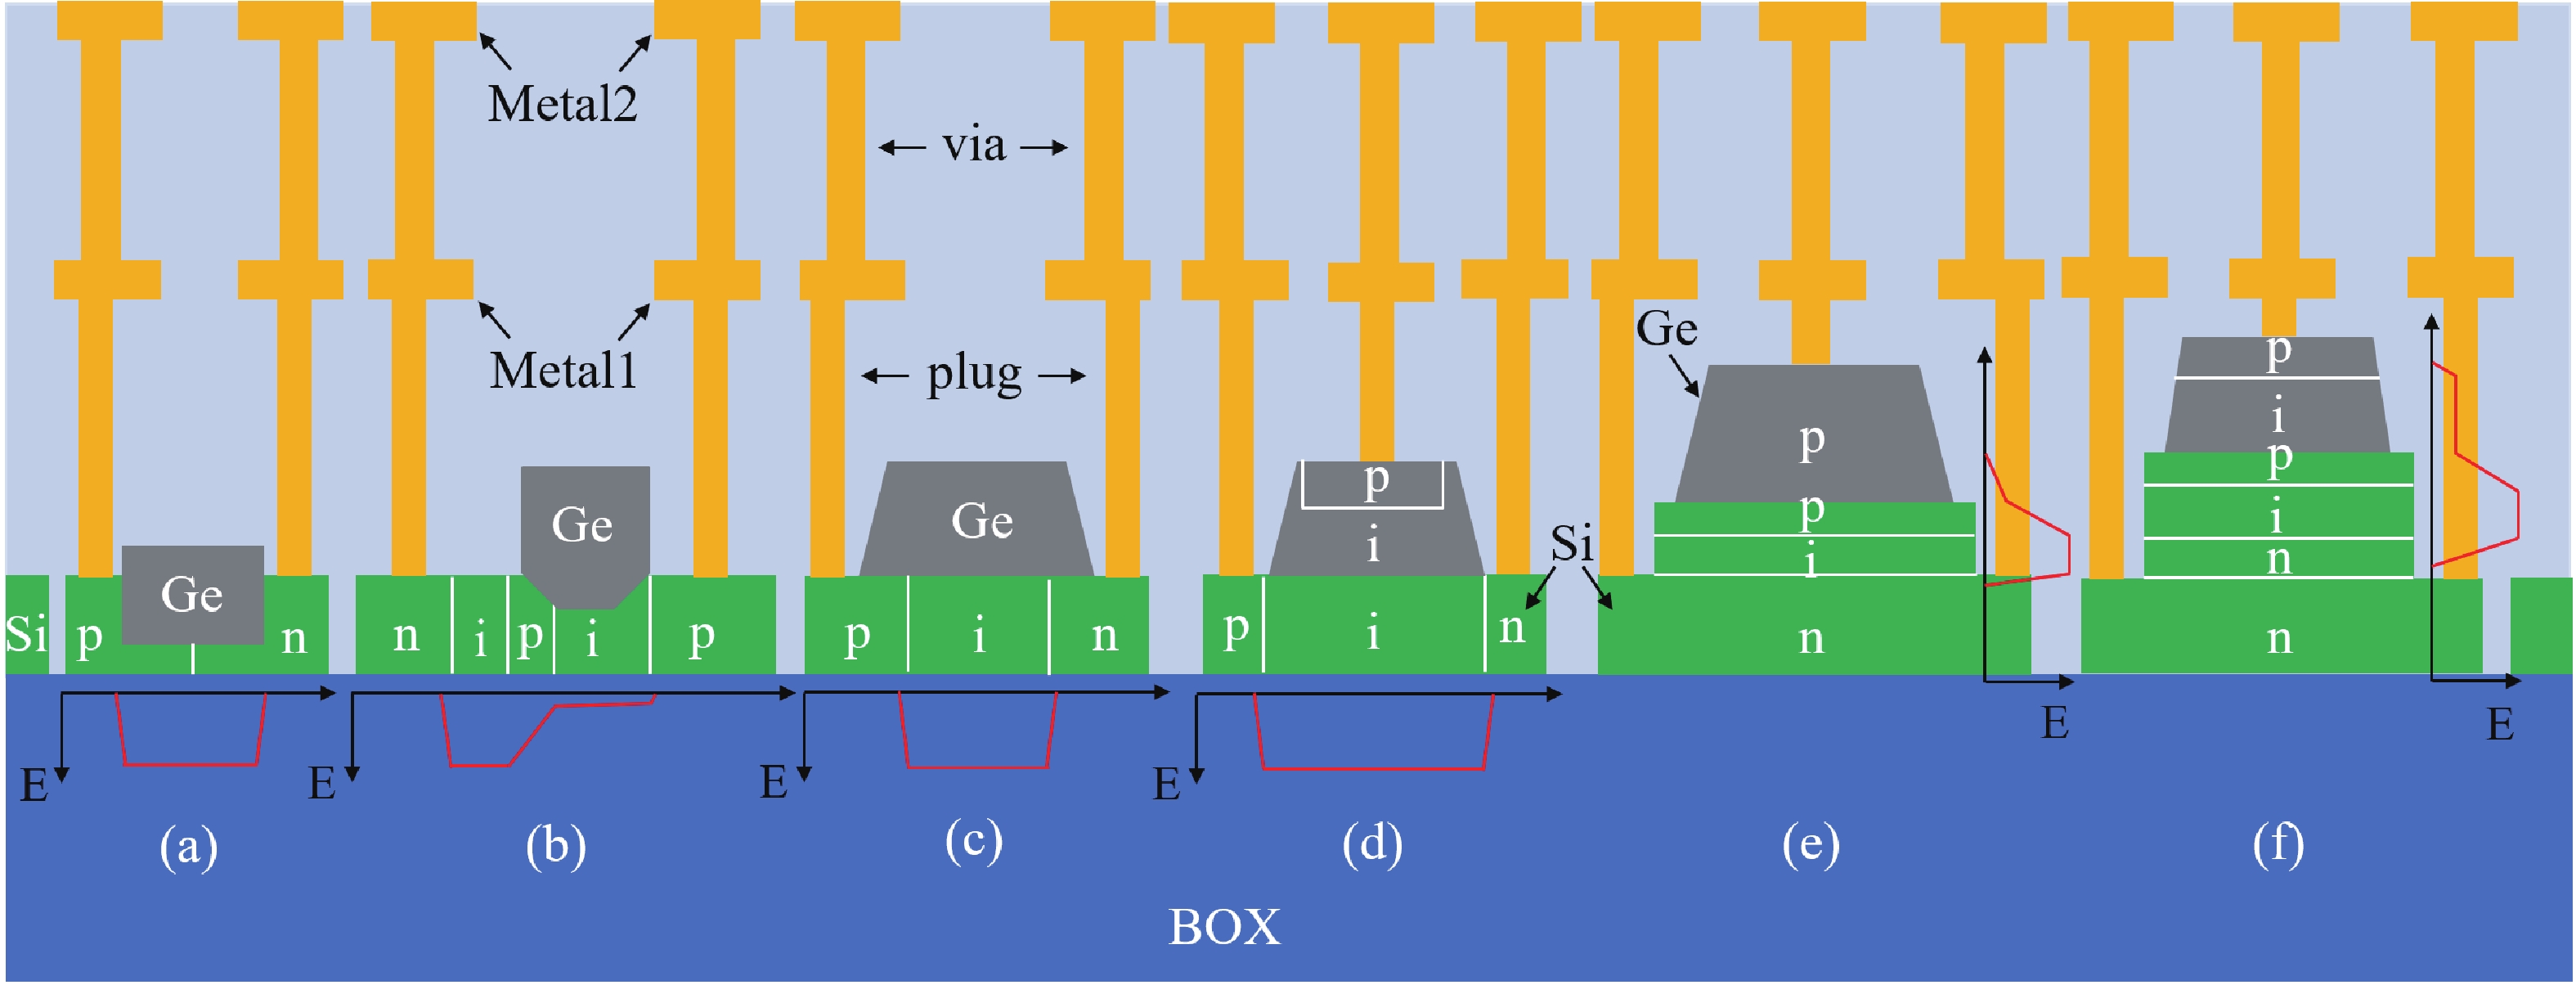 (Color online) Common structures of Si–Ge APDs with E-field: (a) lateral p–i–n Si–Ge–Si APD[18], (b) Ge on lateral SACM Si APD[19], (c) Ge on lateral p–i–n Si APD[20], (d) hybrid vertical and lateral p–i–n APD[21], (e) vertical SACM p–p–i–n APD[22], and (f) vertical SACM p–i–p–i–n APD[23, 24].